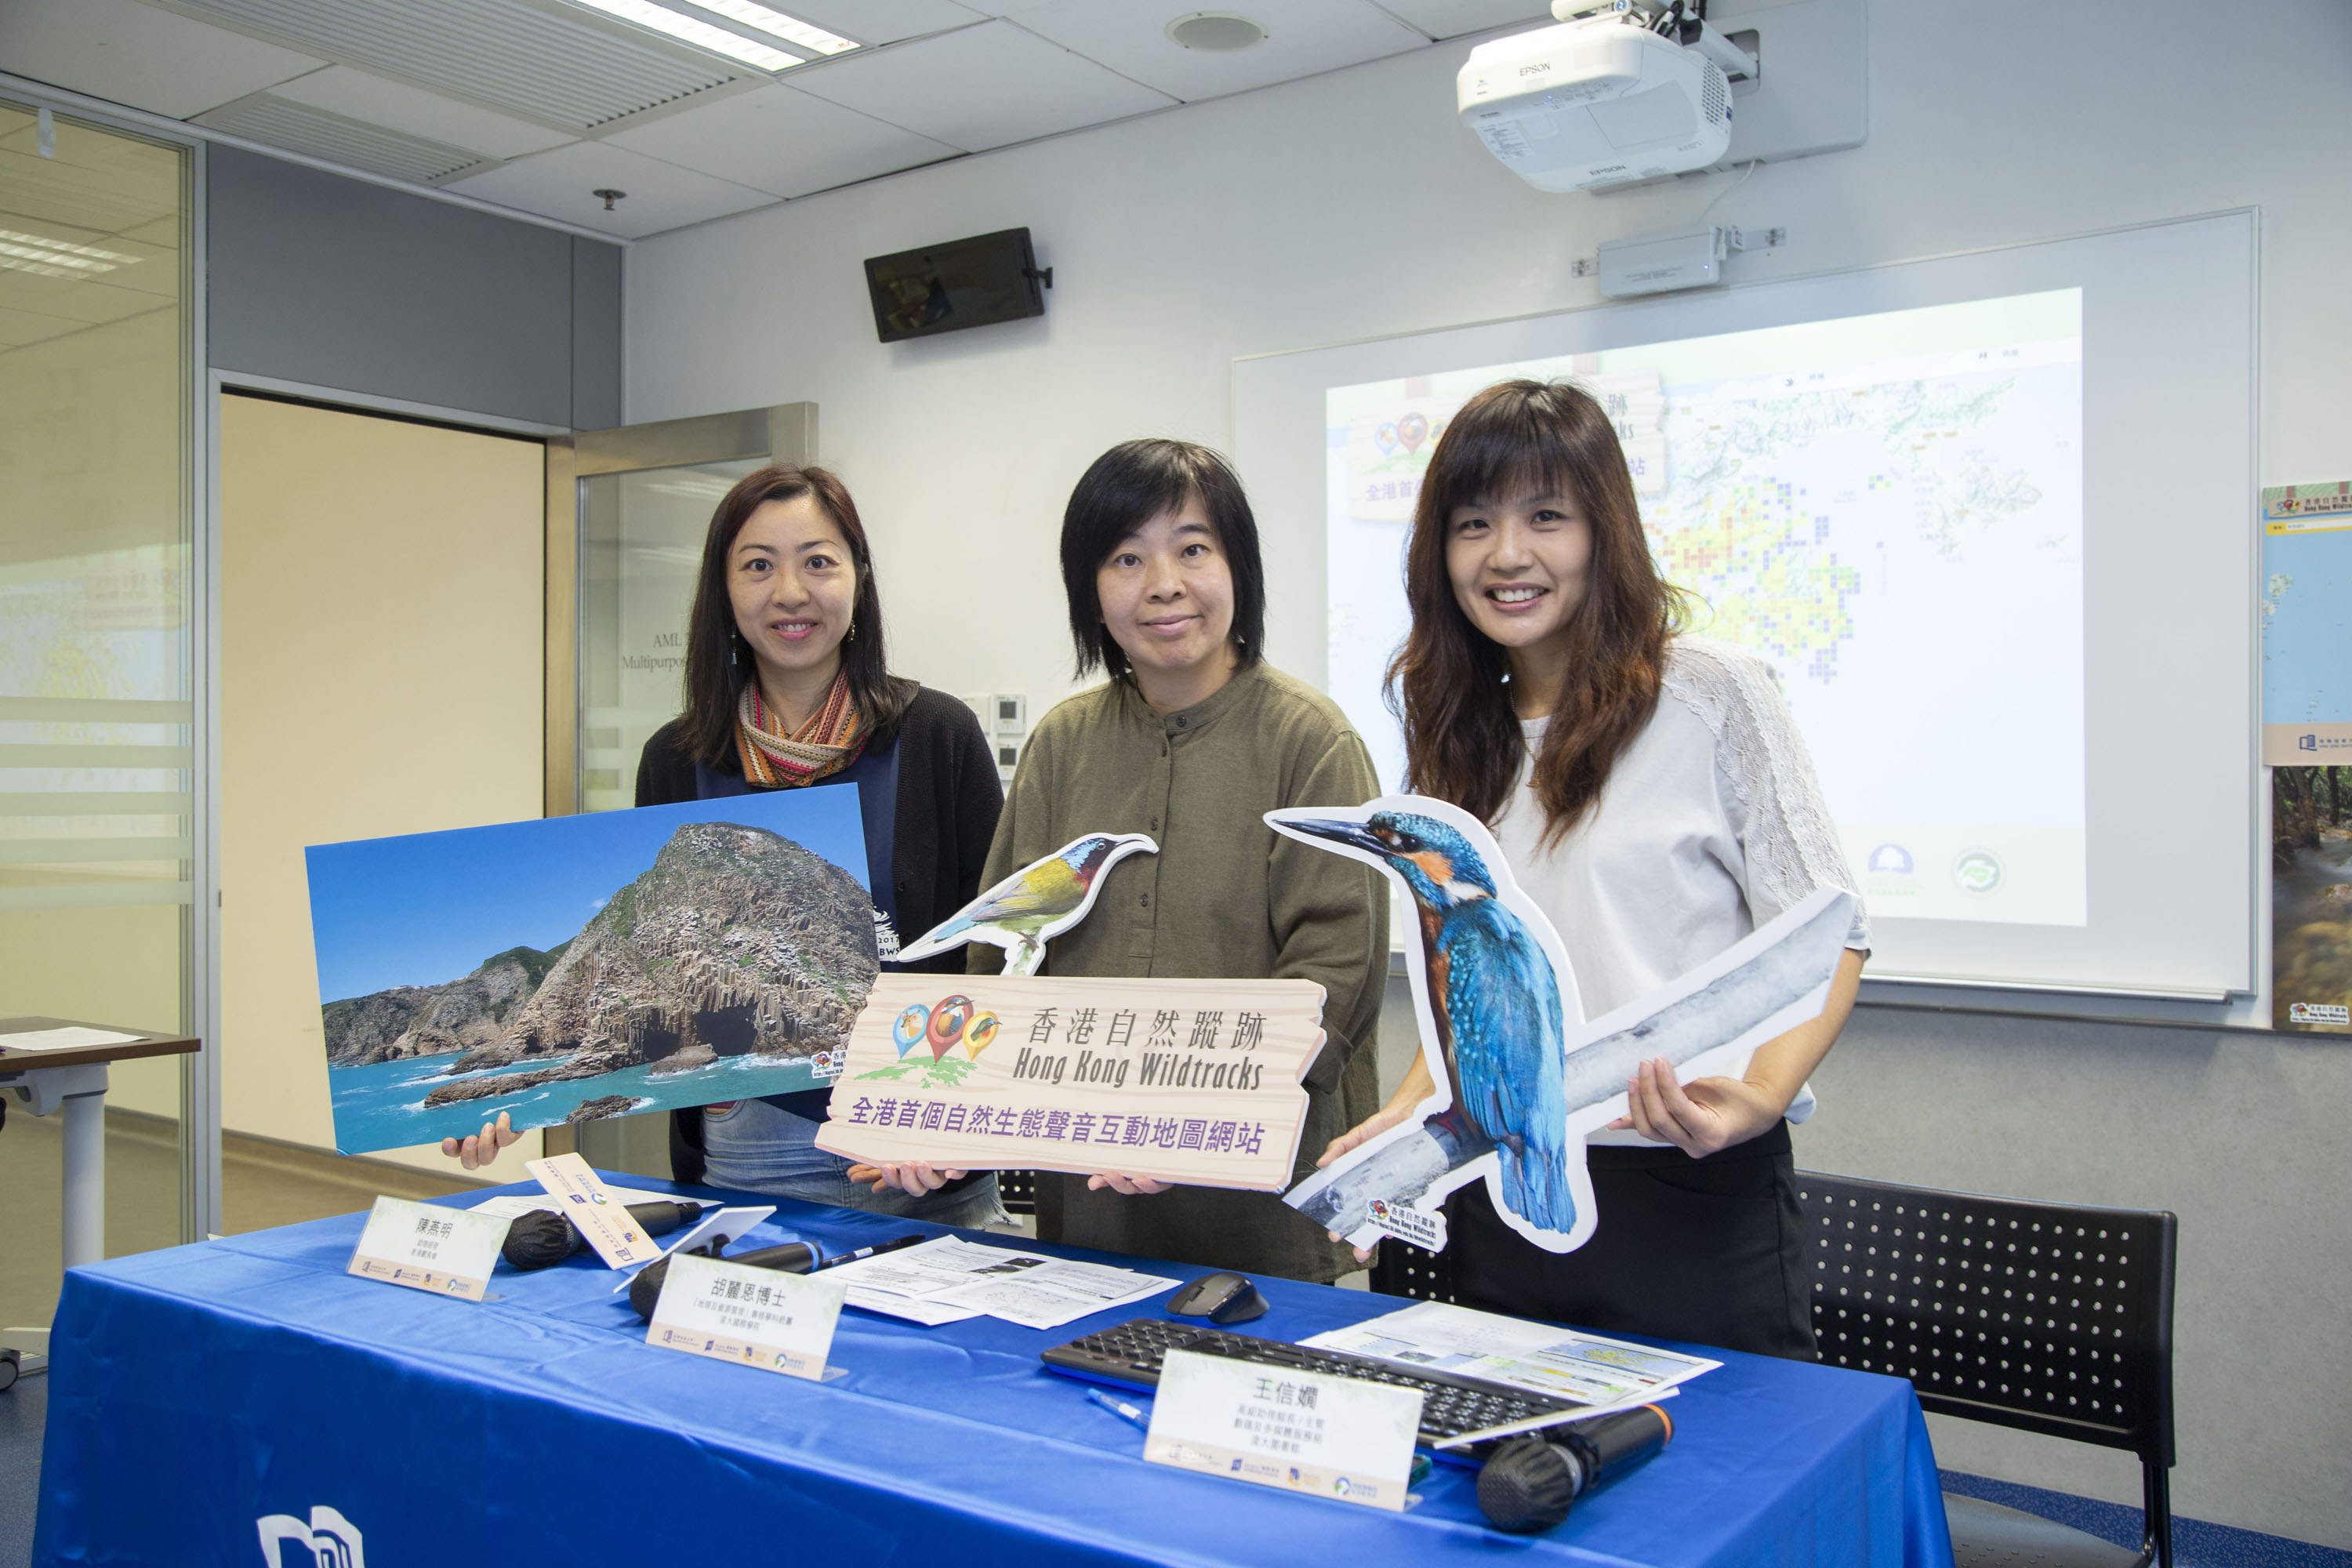 HKBU and HKBWS jointly developed the “Hong Kong Wildtracks” website which aims to promote Hong Kong's rich biodiversity and support nature conservation.